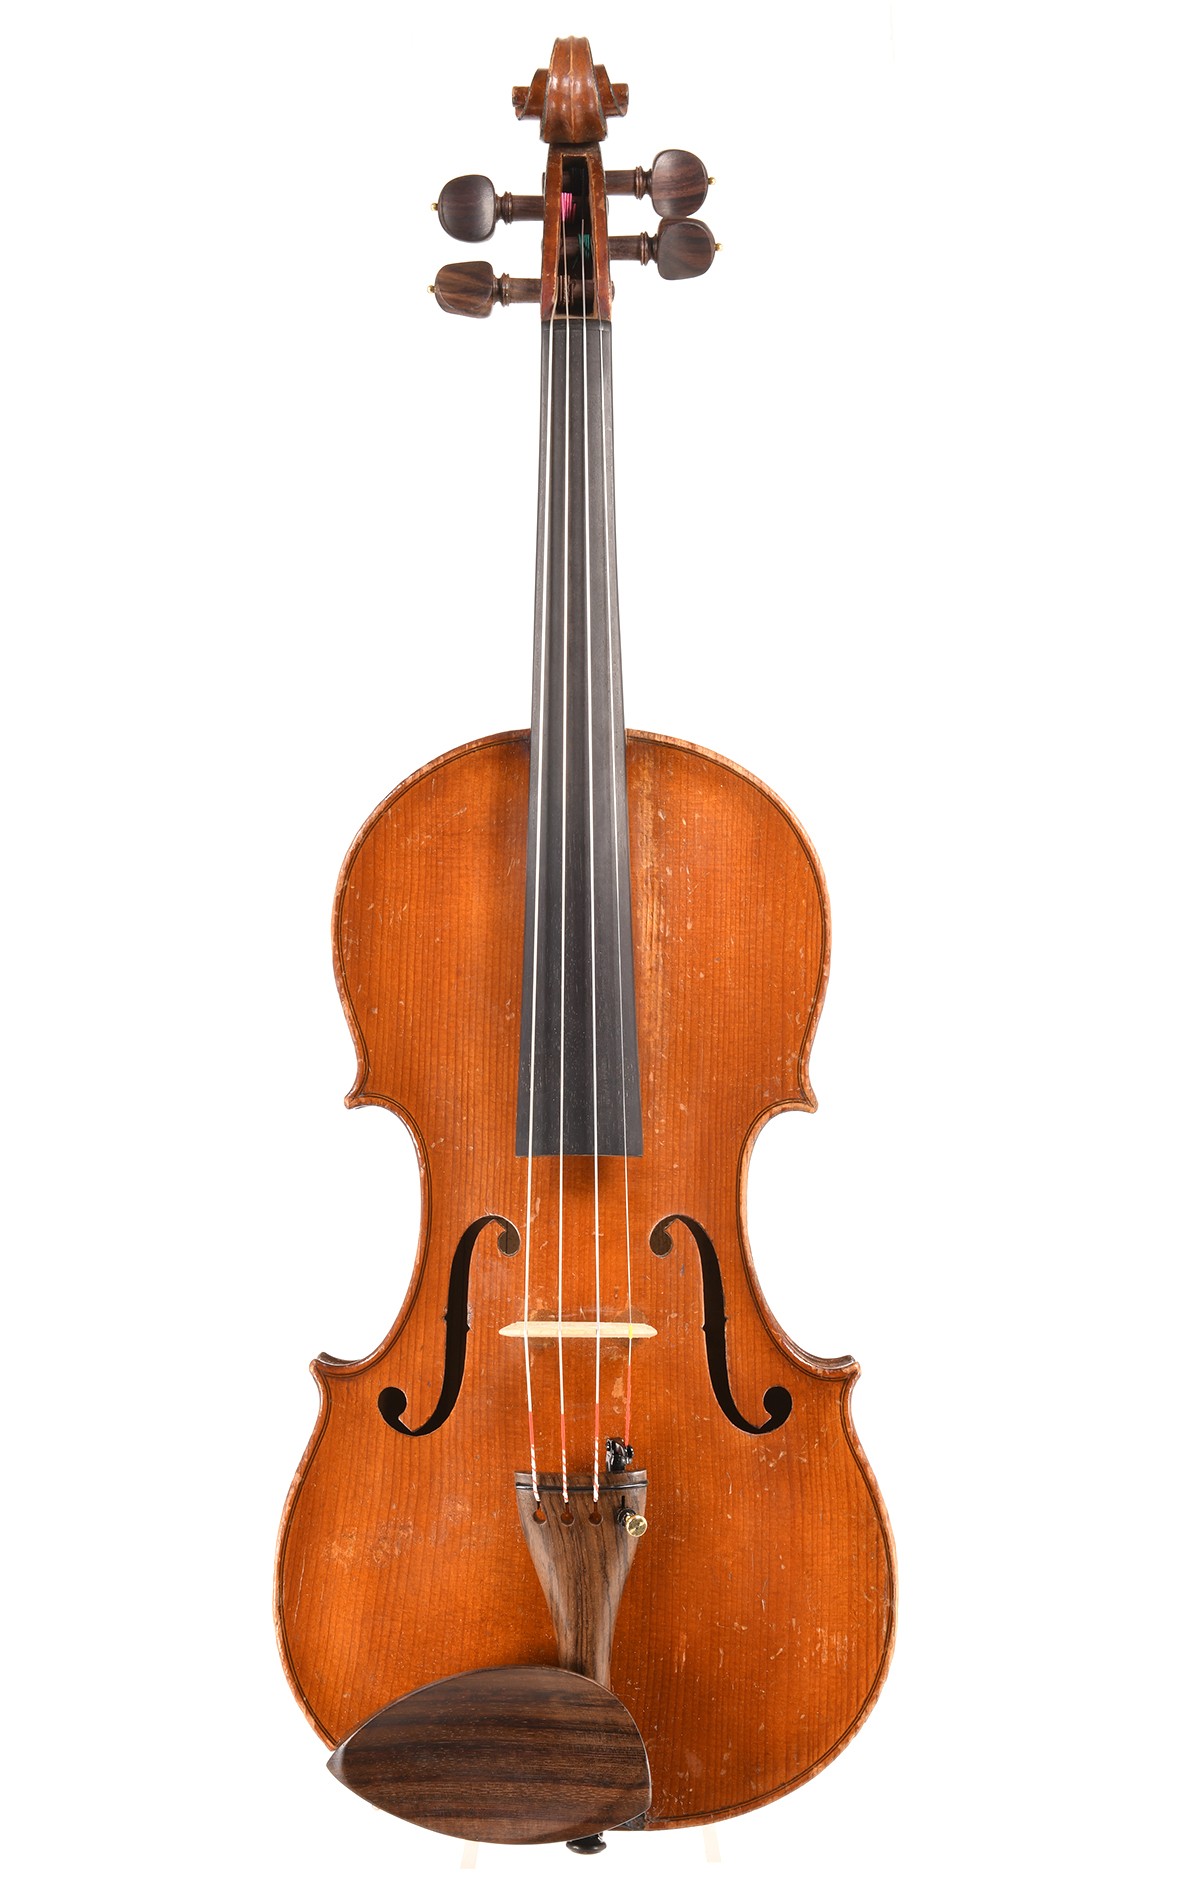 French violin Andreas Borelli model by Laberte-Humbert Frères